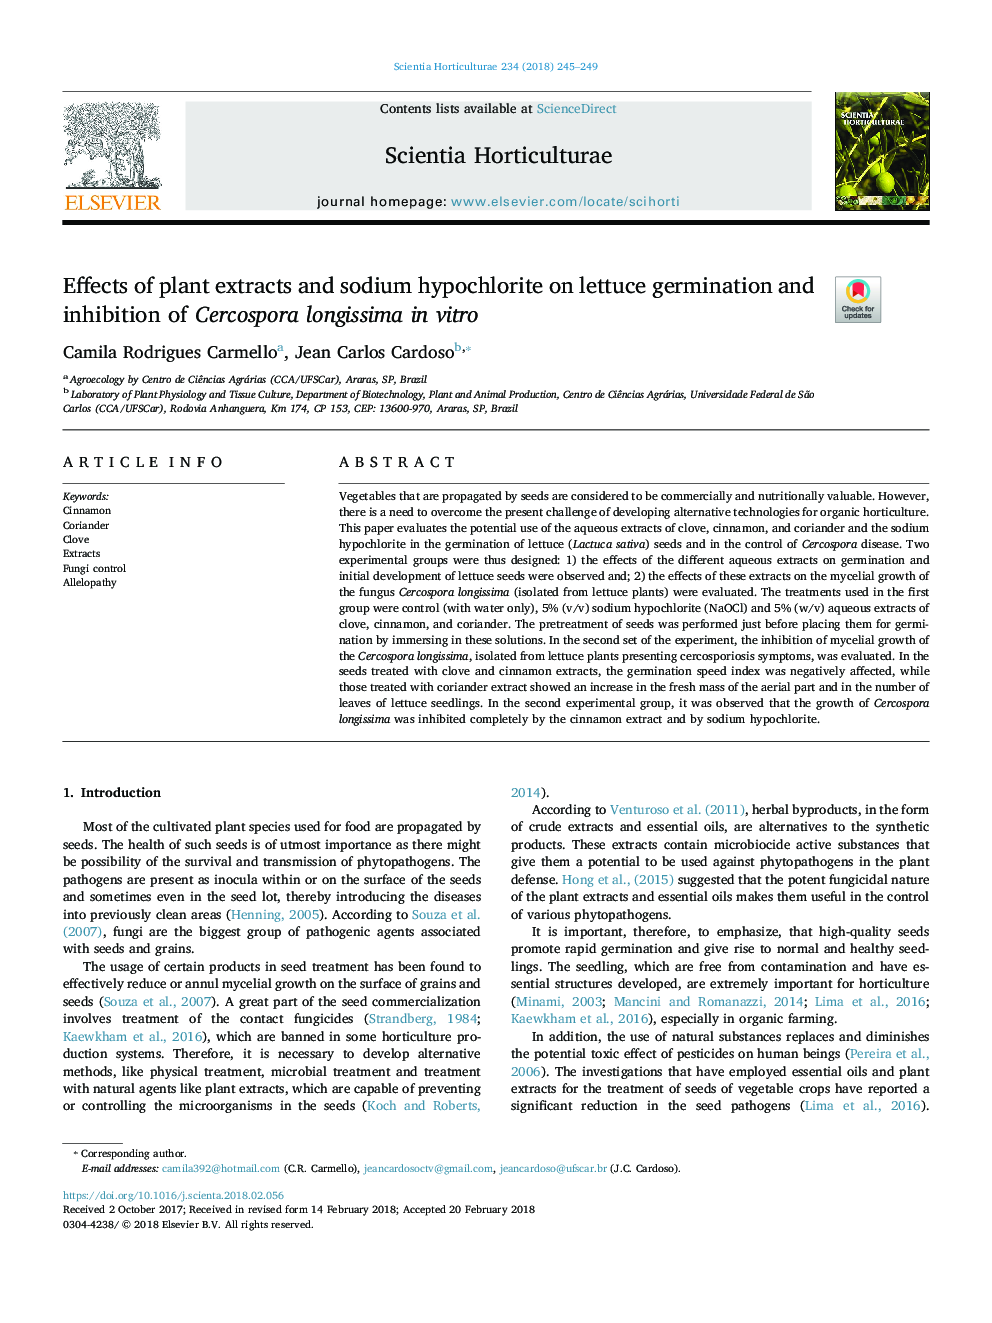 Effects of plant extracts and sodium hypochlorite on lettuce germination and inhibition of Cercospora longissima in vitro